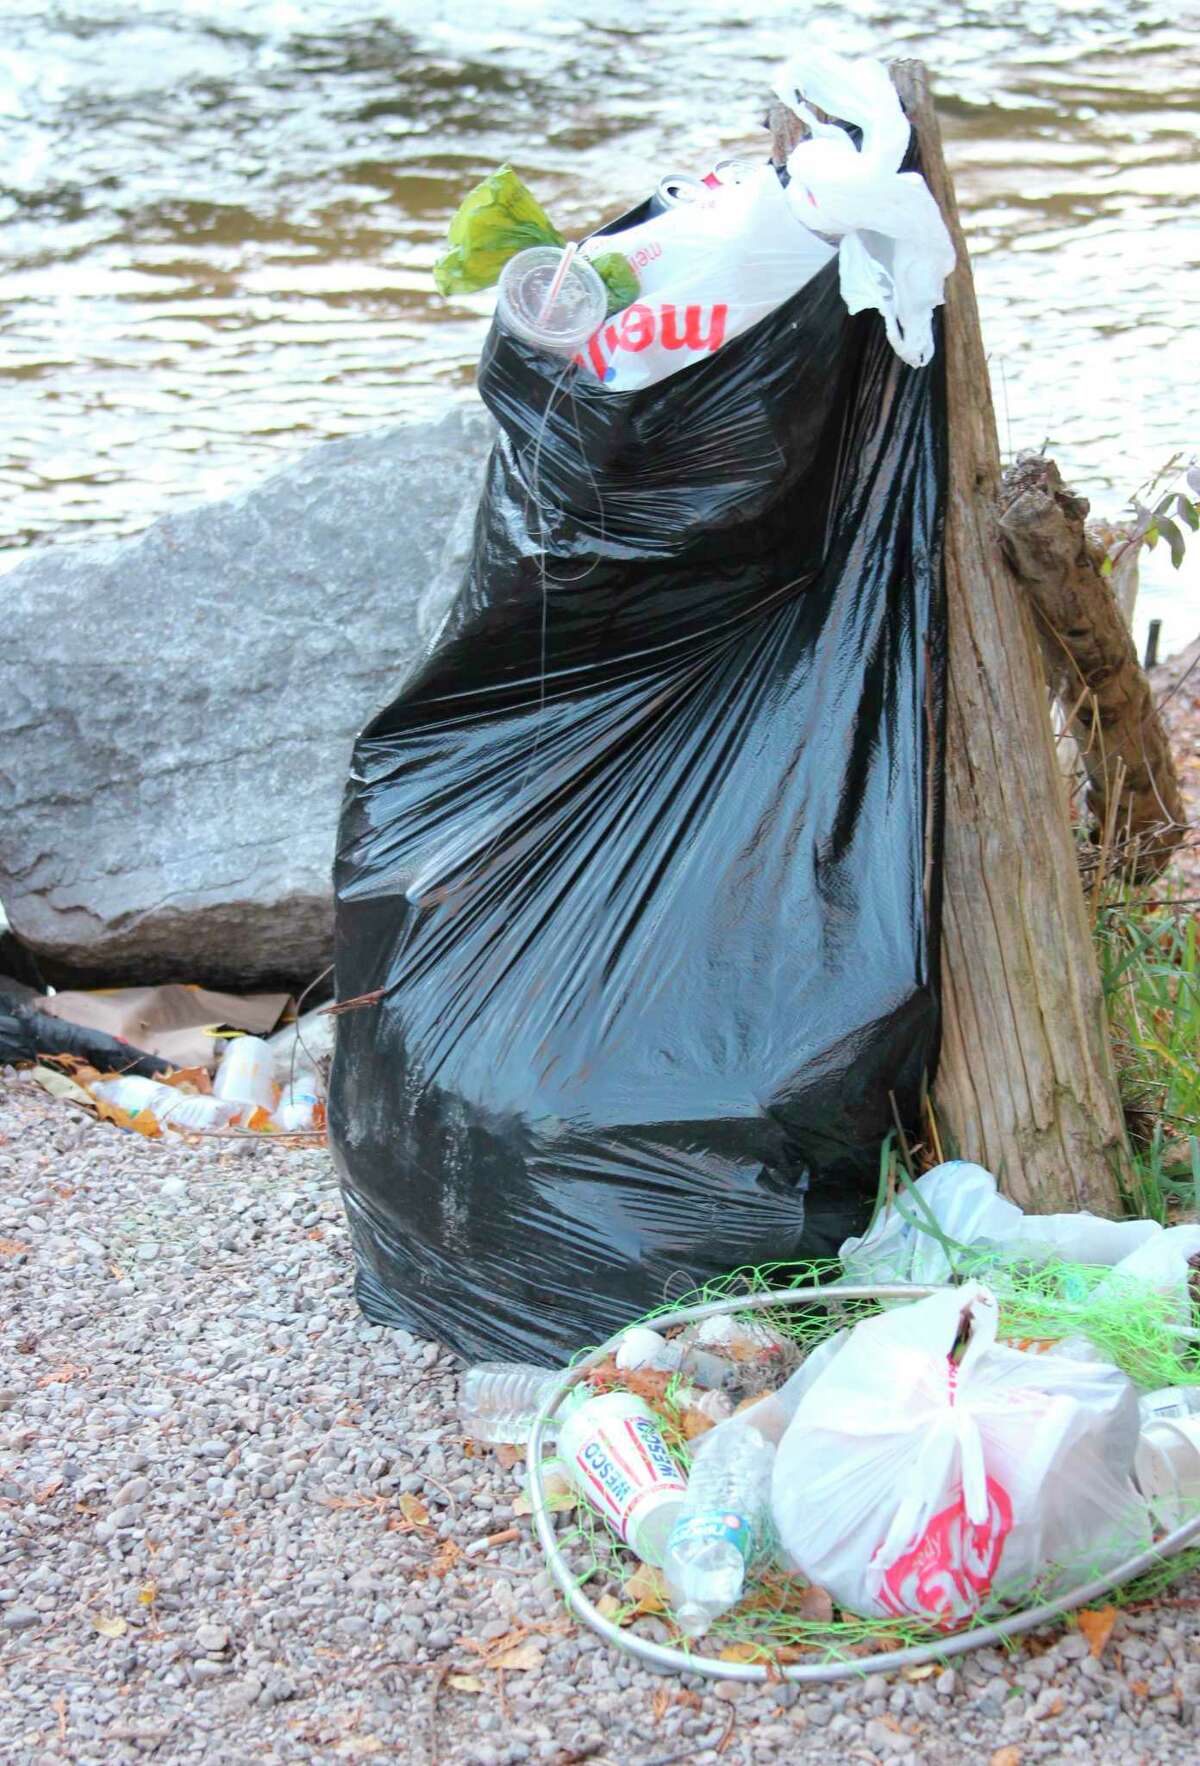 Garbage left at the Homestead Dam after the 2020 salmon run was a common sight as the river there is popular with anglers. The DNR is reminding anglers to clean up after themselves. (File Photo)